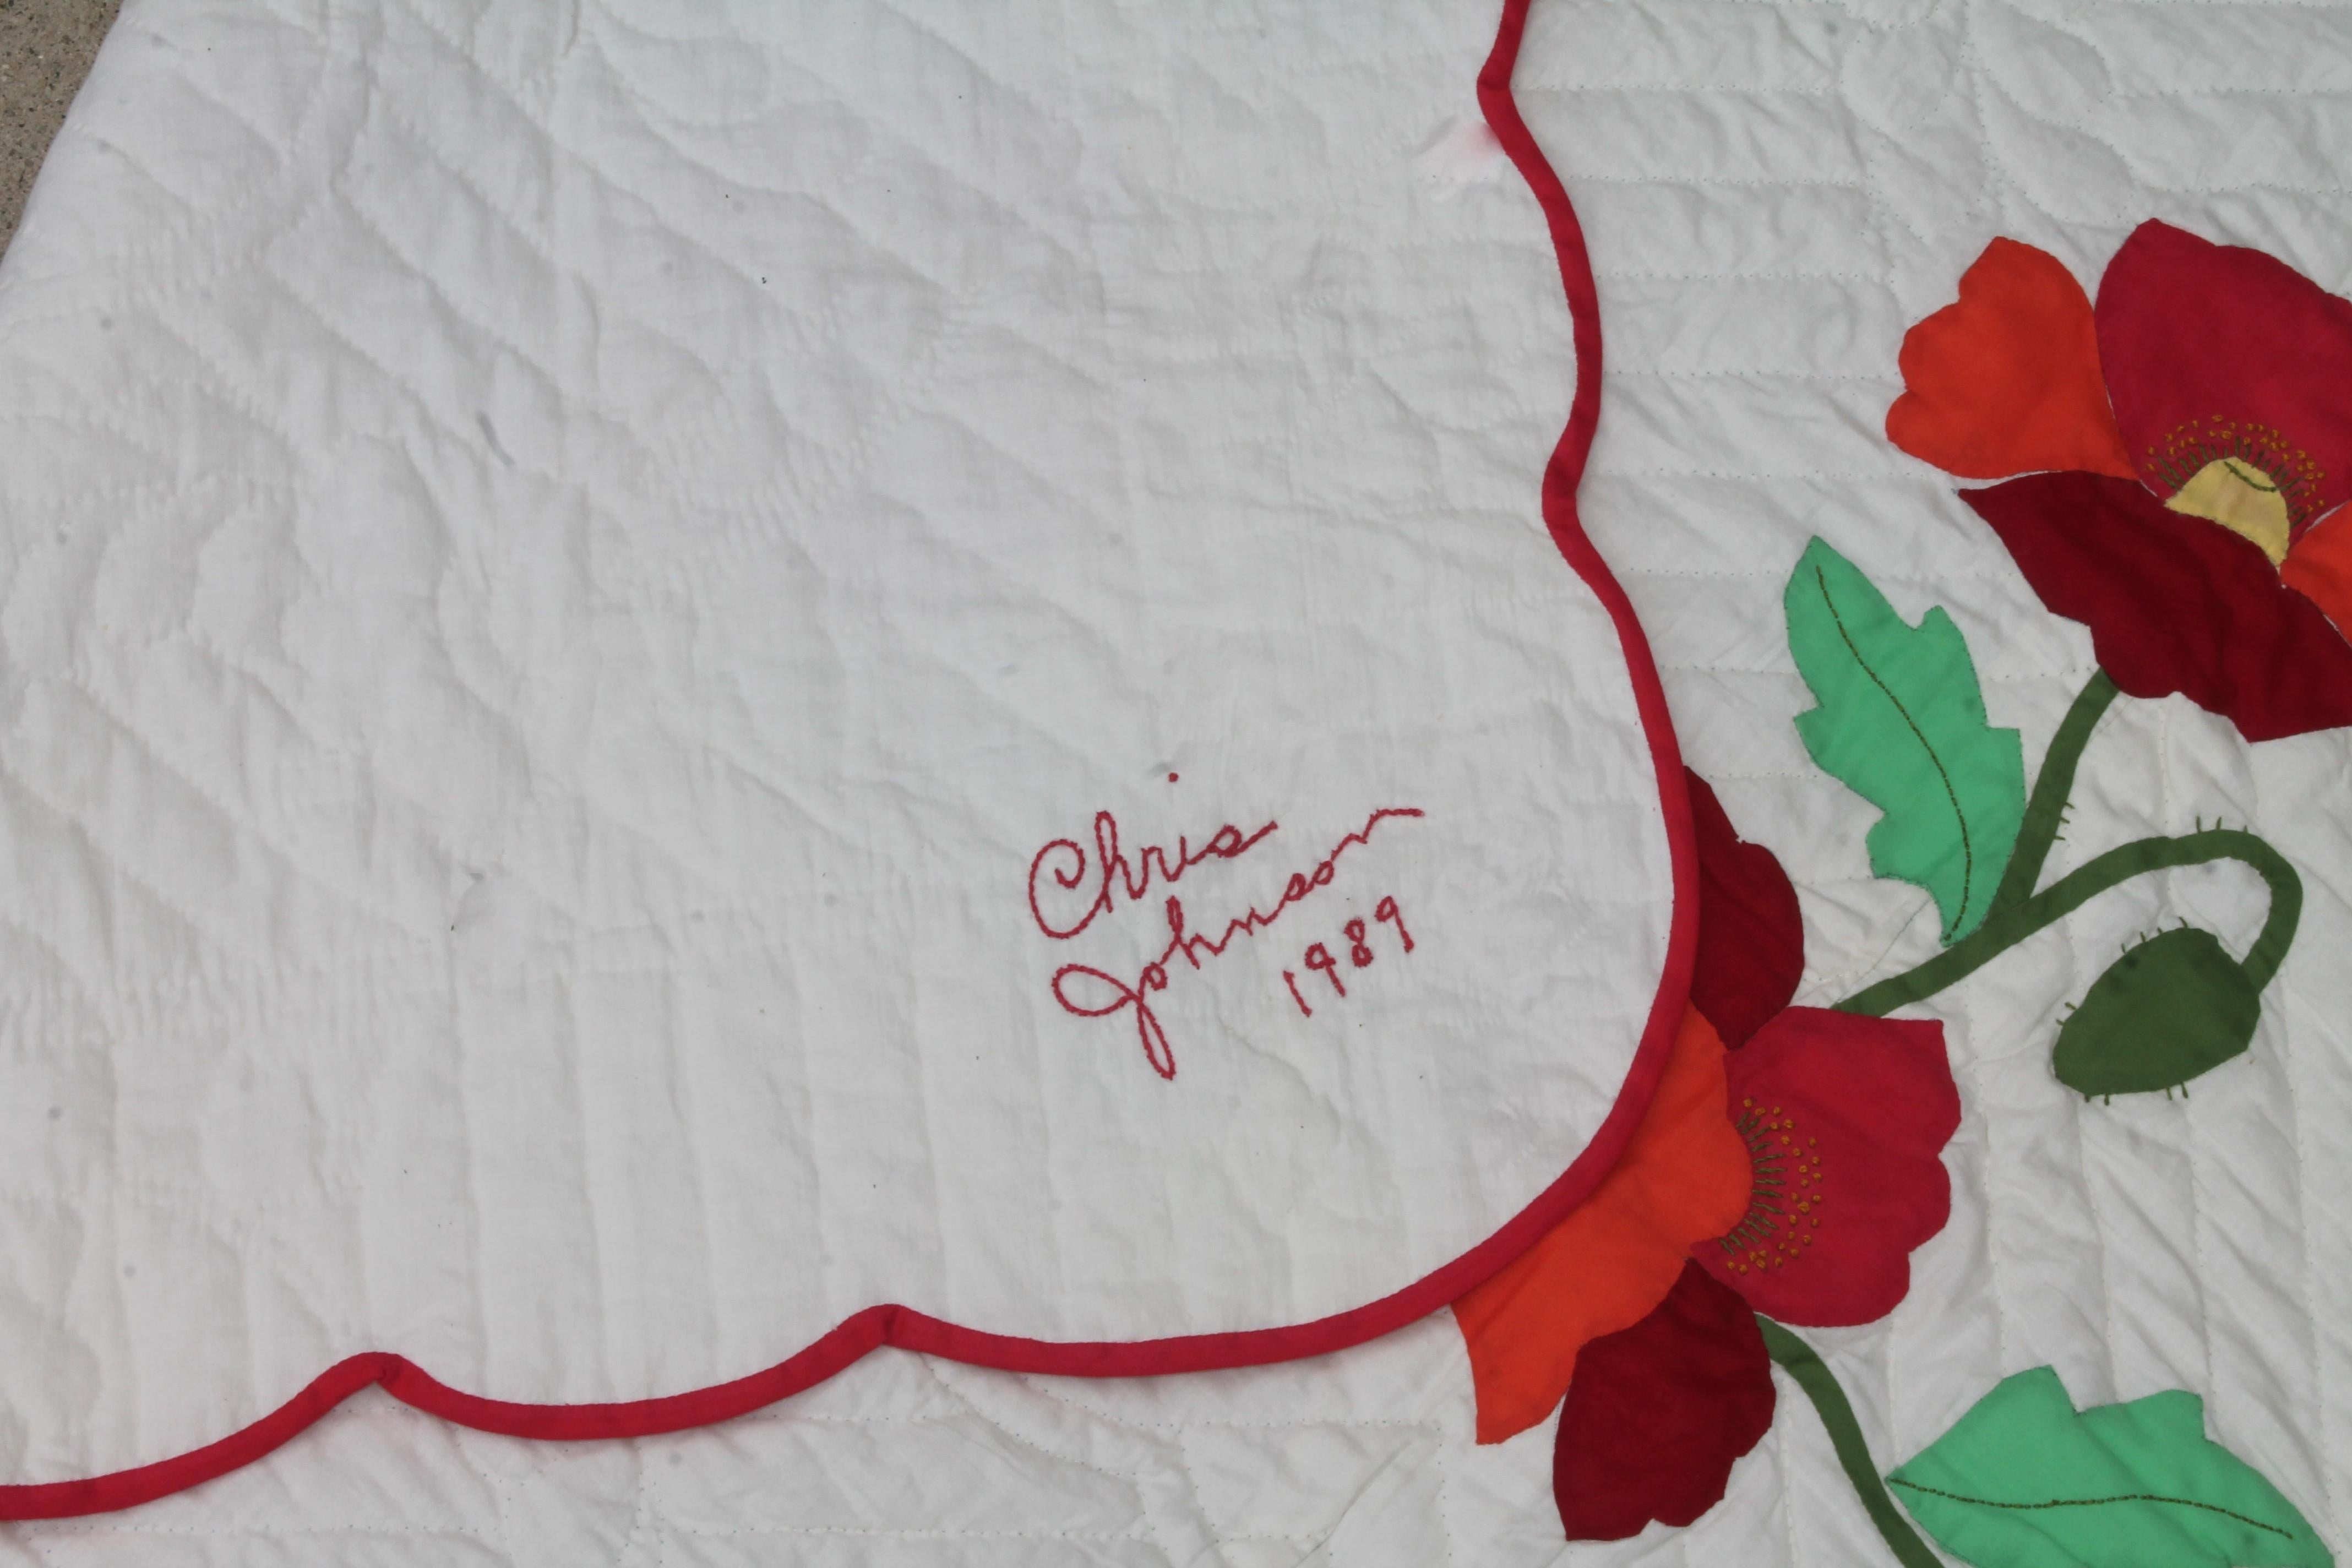 American Applique Rose Quilt Signed and Dated 1989 For Sale